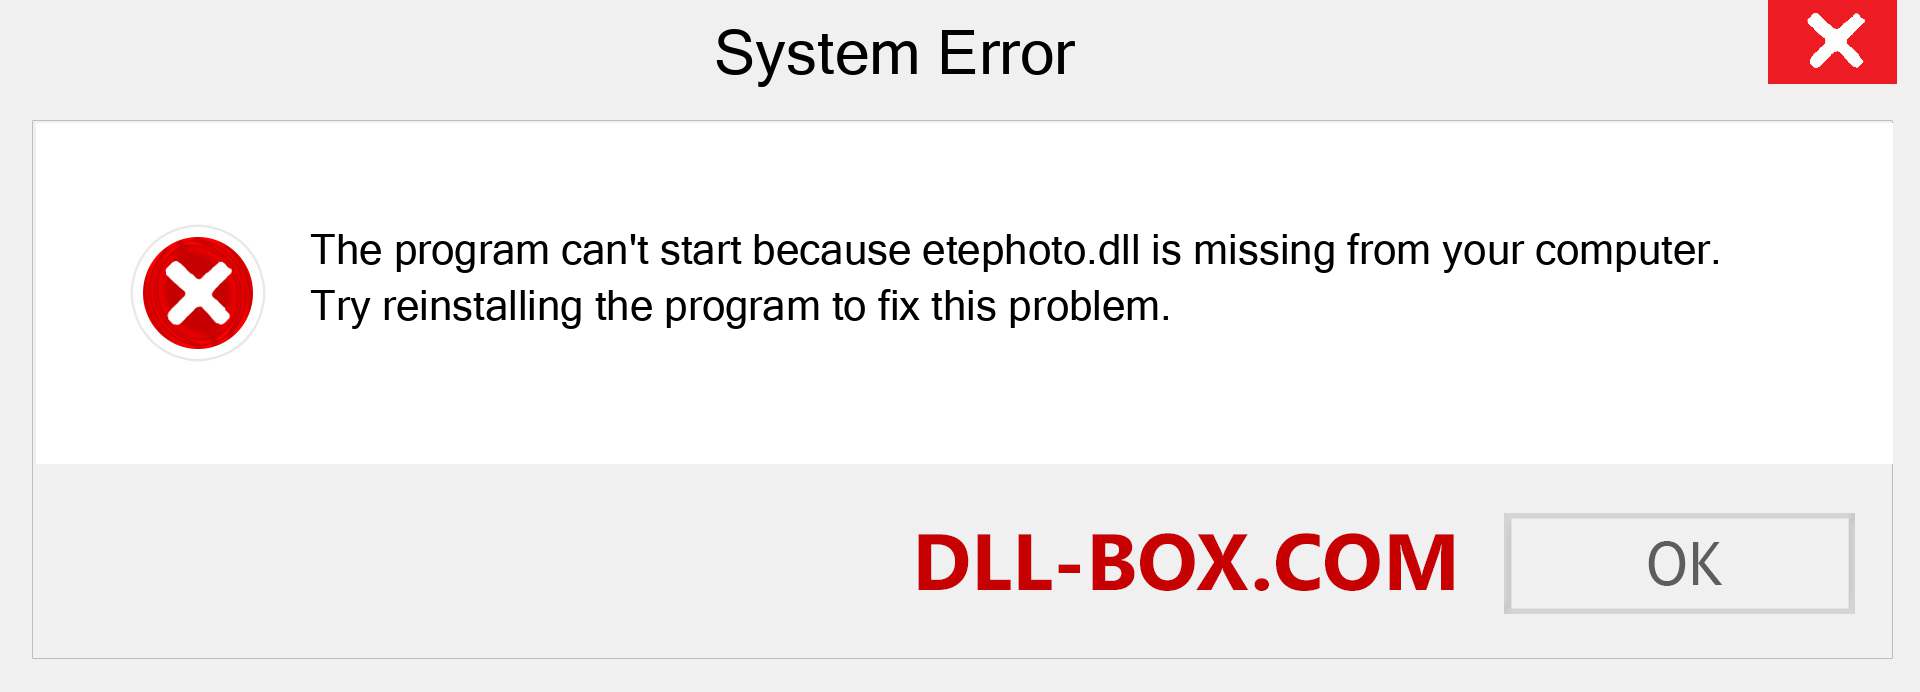  etephoto.dll file is missing?. Download for Windows 7, 8, 10 - Fix  etephoto dll Missing Error on Windows, photos, images